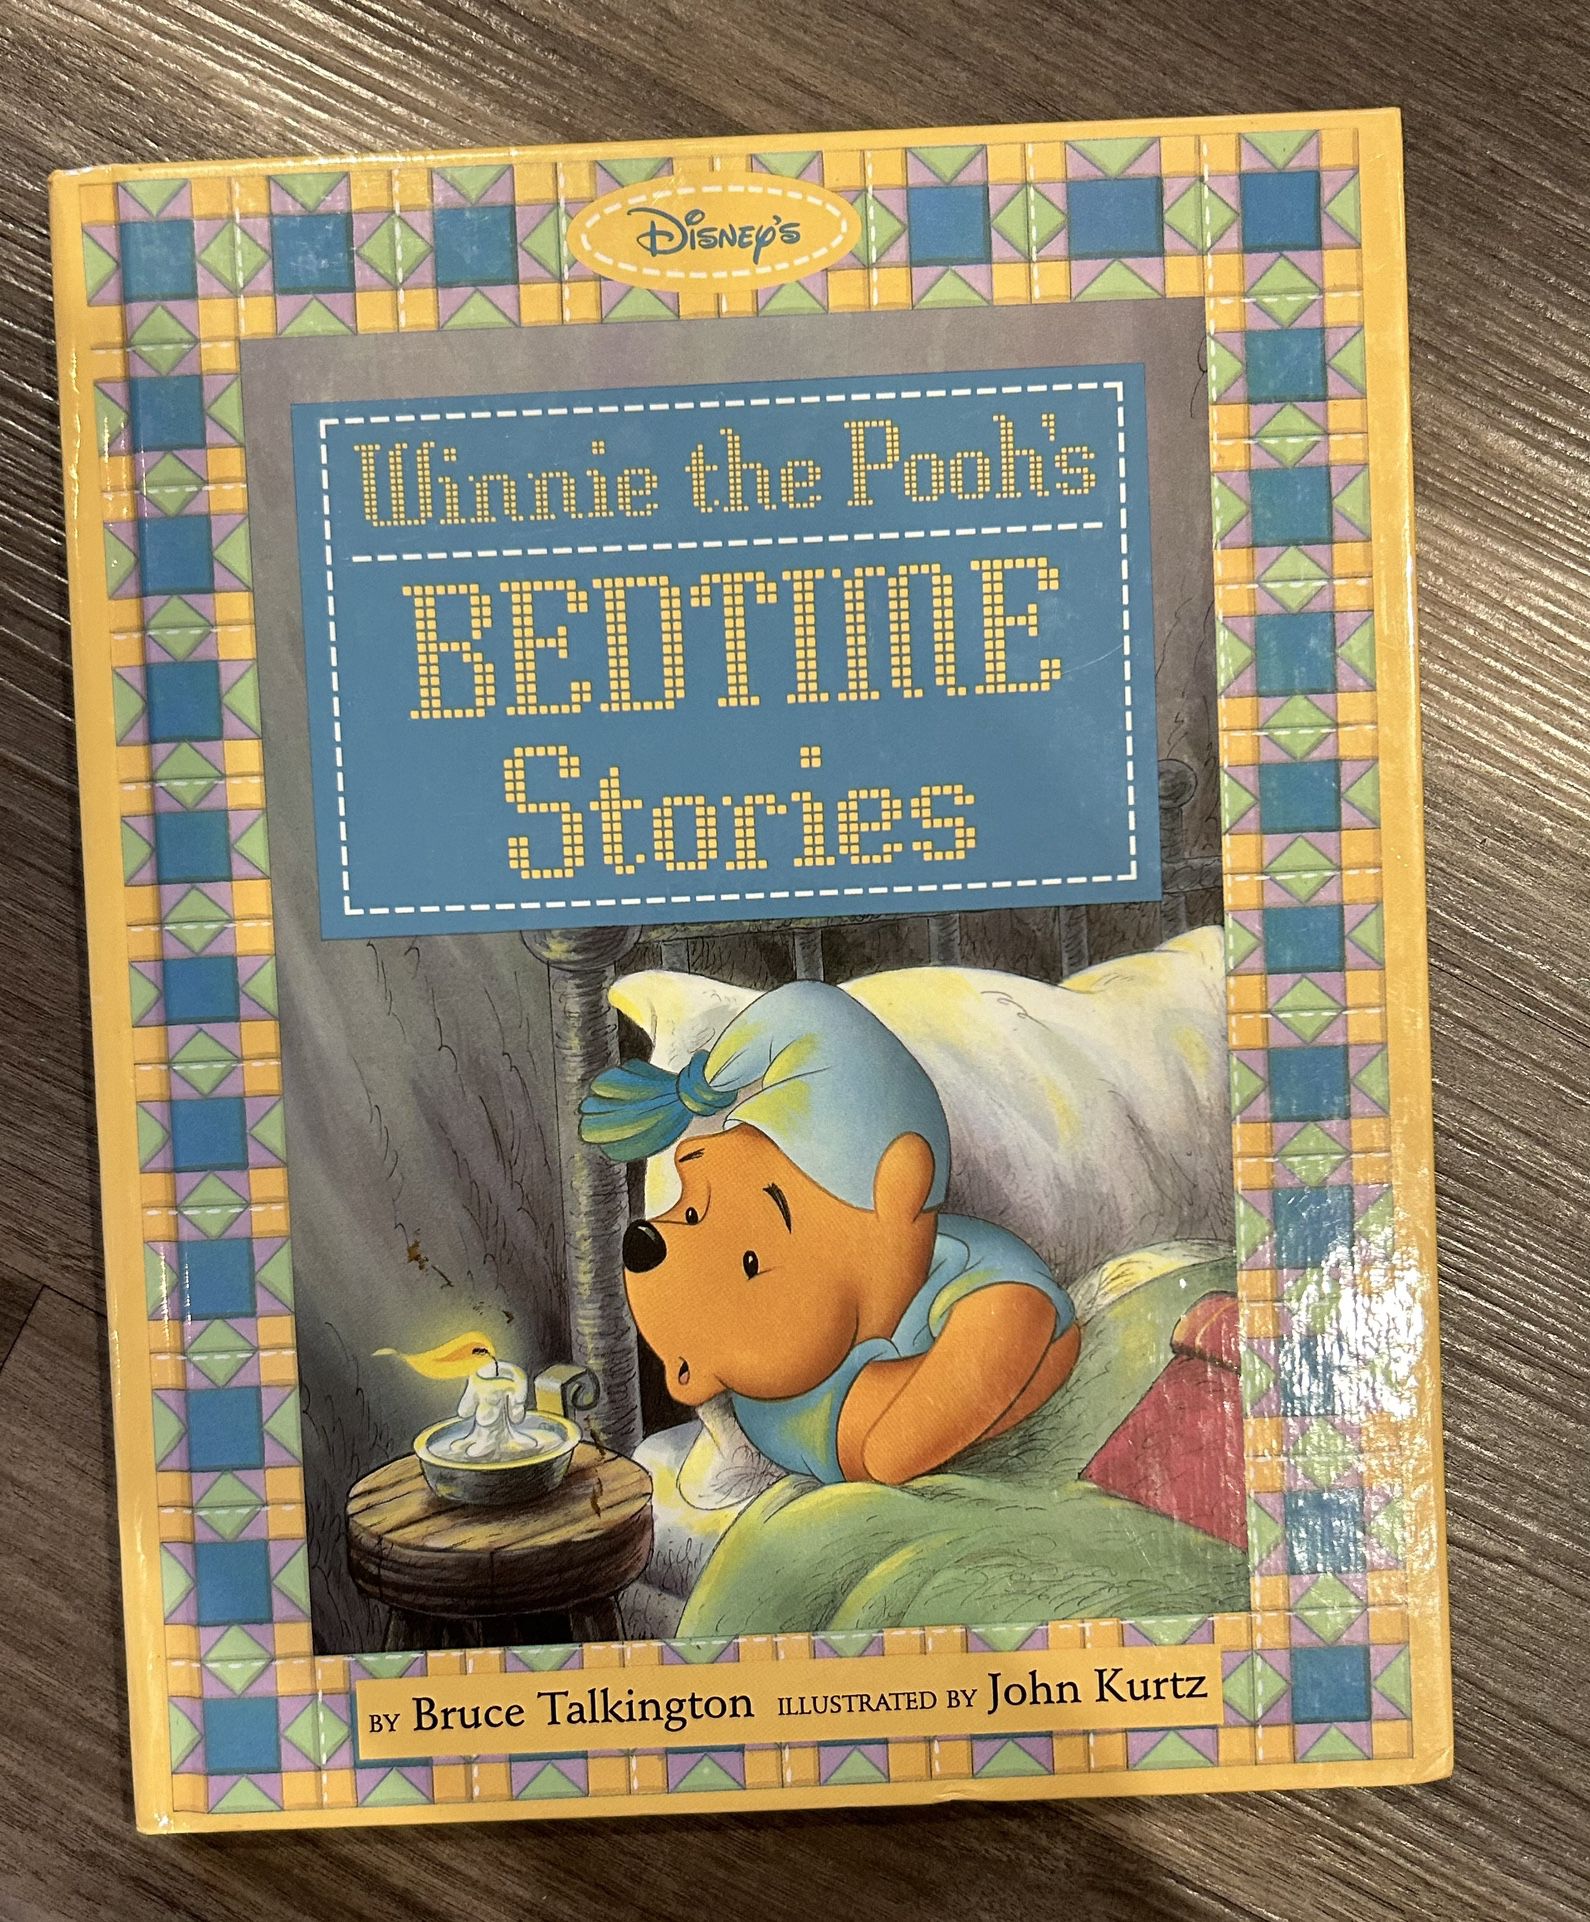 Winnie The Poohs Bedtime Stories (Brand New)